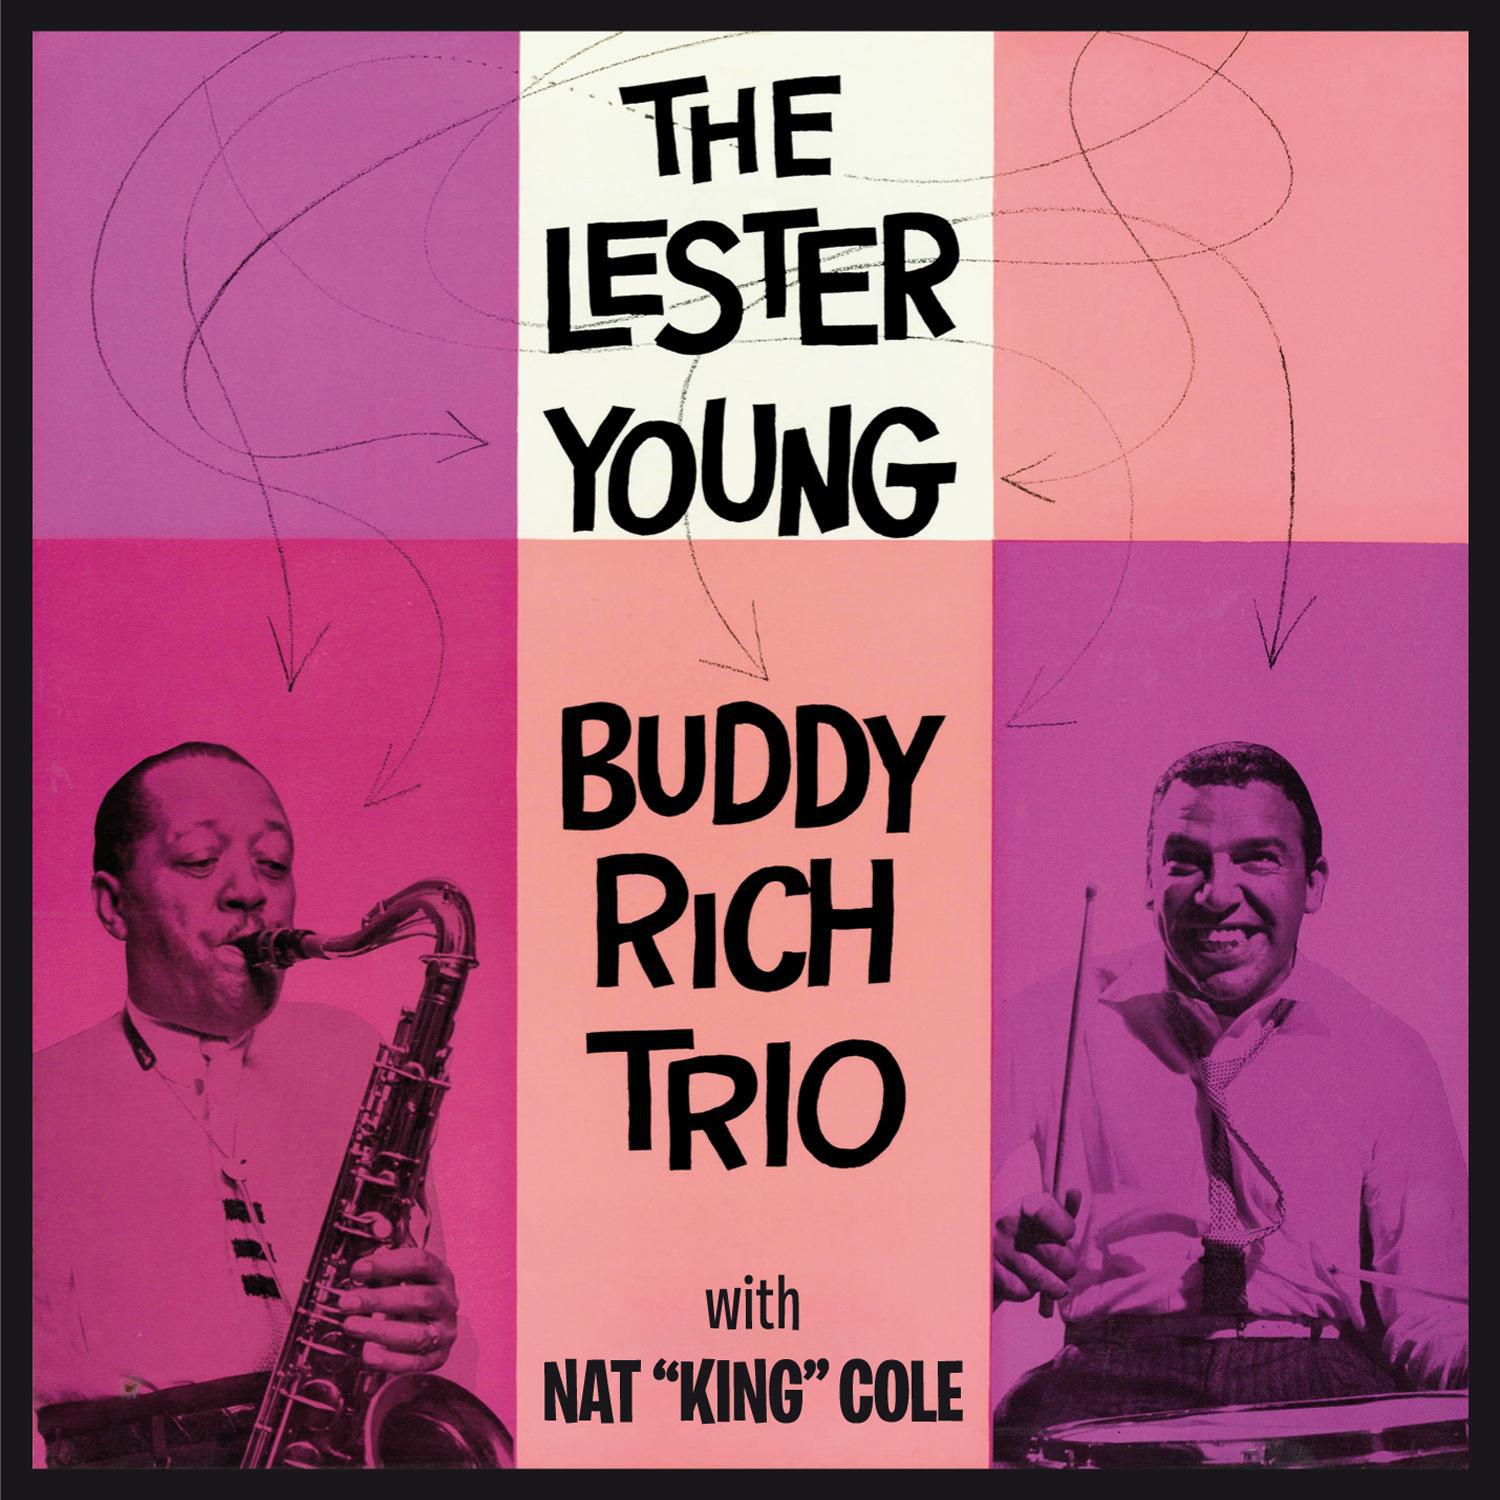 The Lester Young-Buddy Rich Trio with Nat "King" Cole (Bonus Track Version)